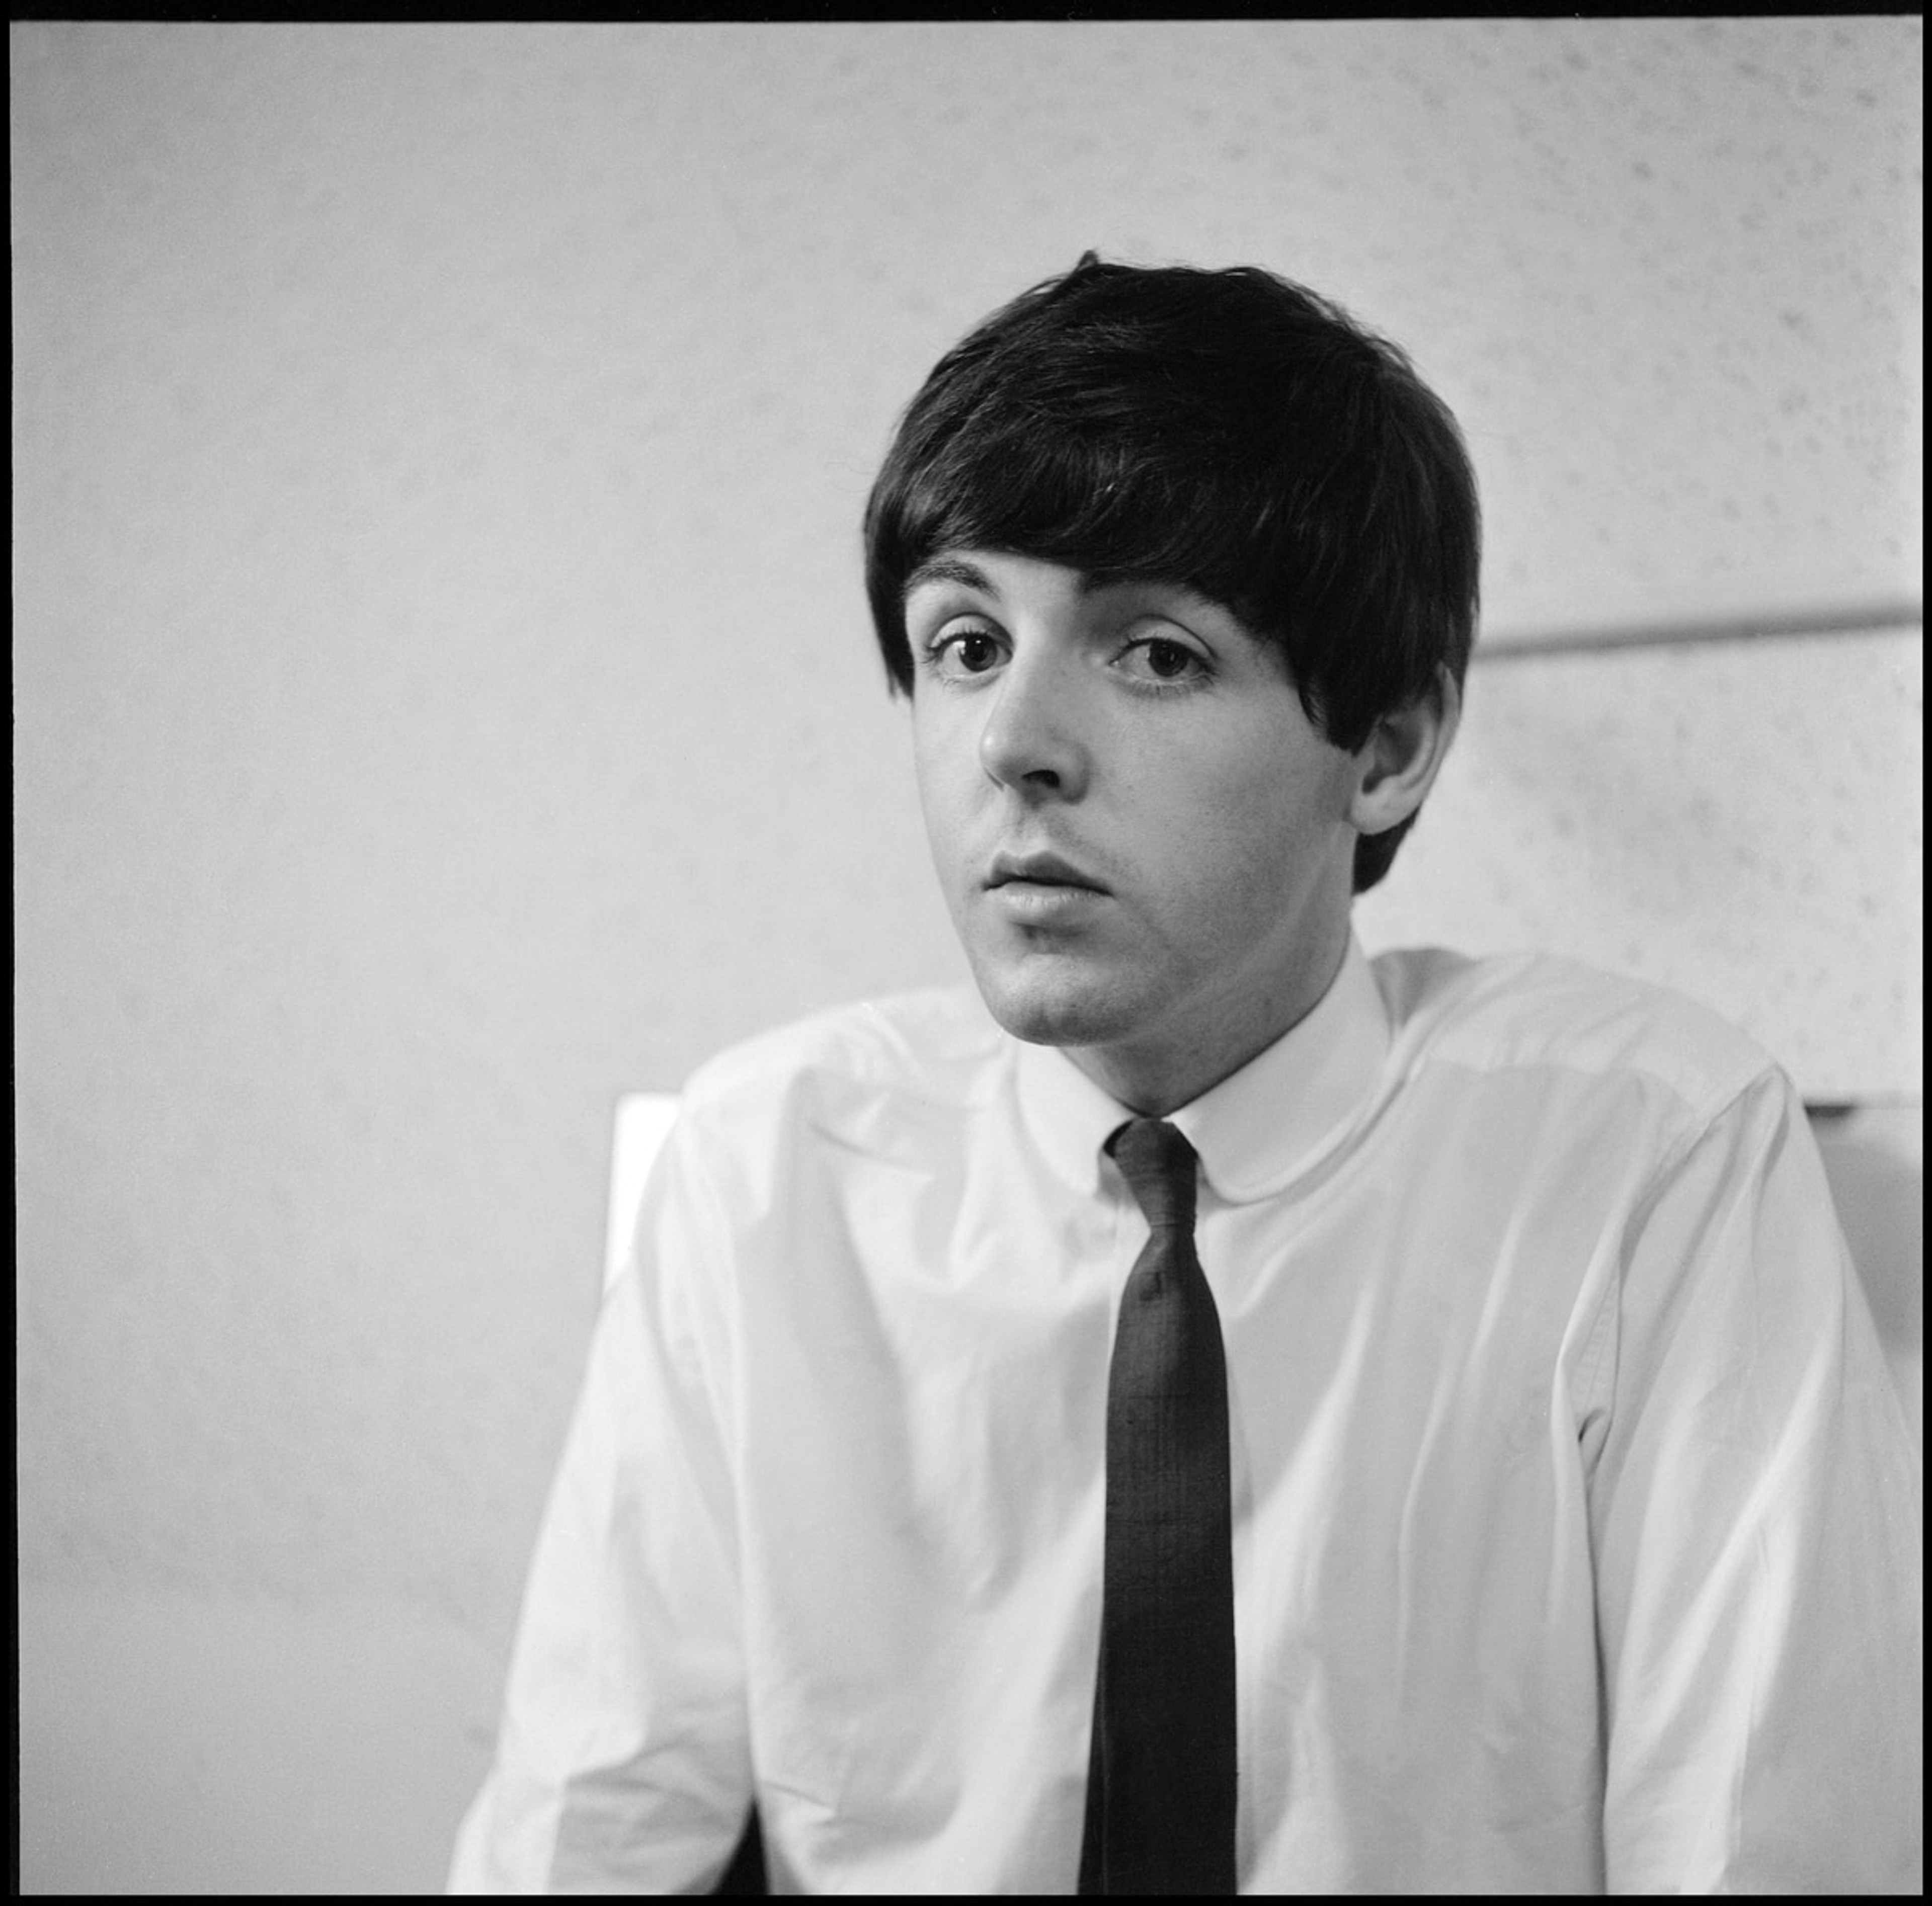 Paul photographed backstage at the television show 'Thank Your Lucky Stars', Birmingham, England, 1963